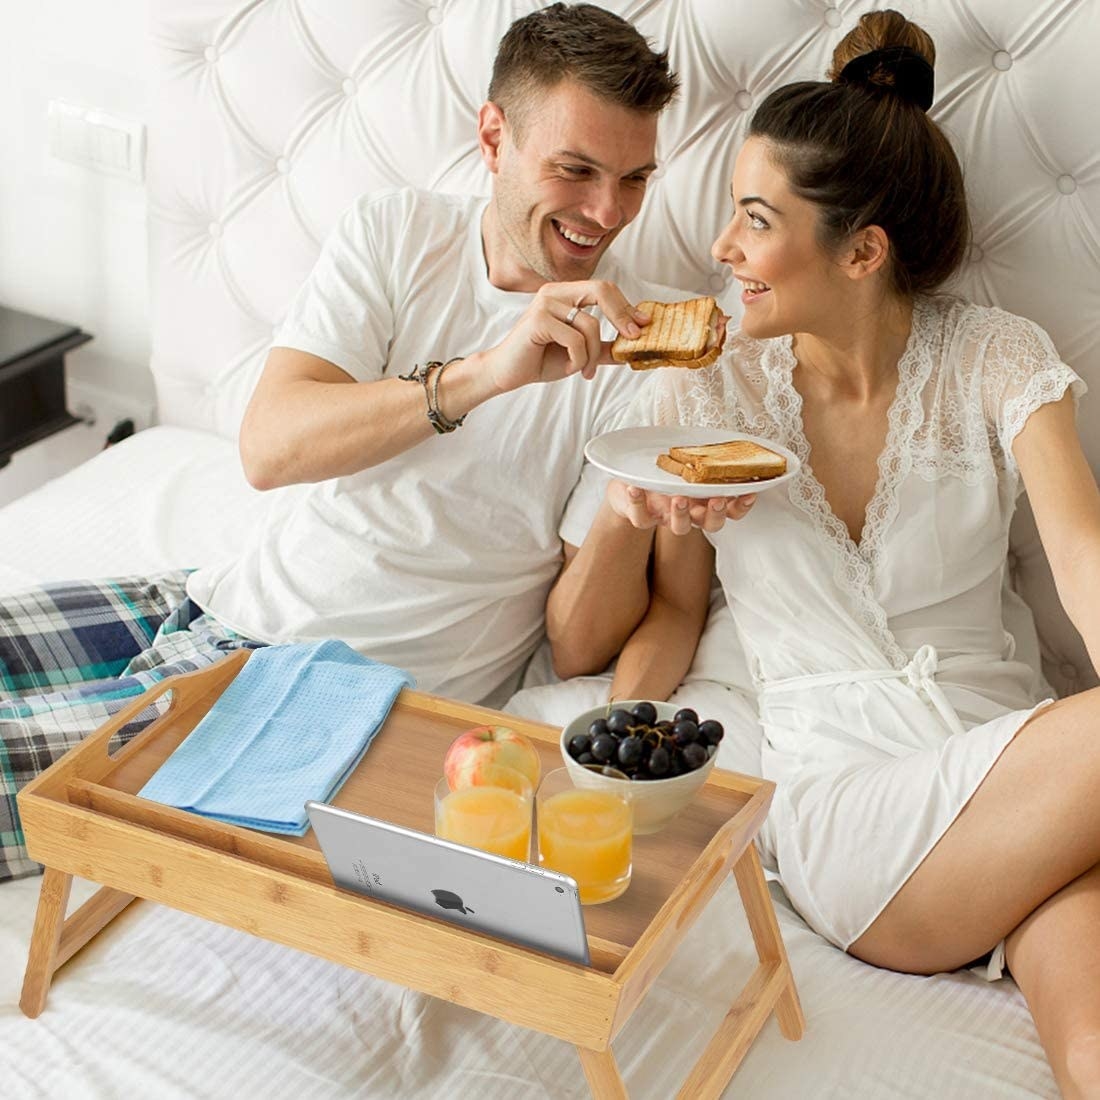 Two people in bed enjoying breakfast in bed with the tray table, which is also displaying ipad